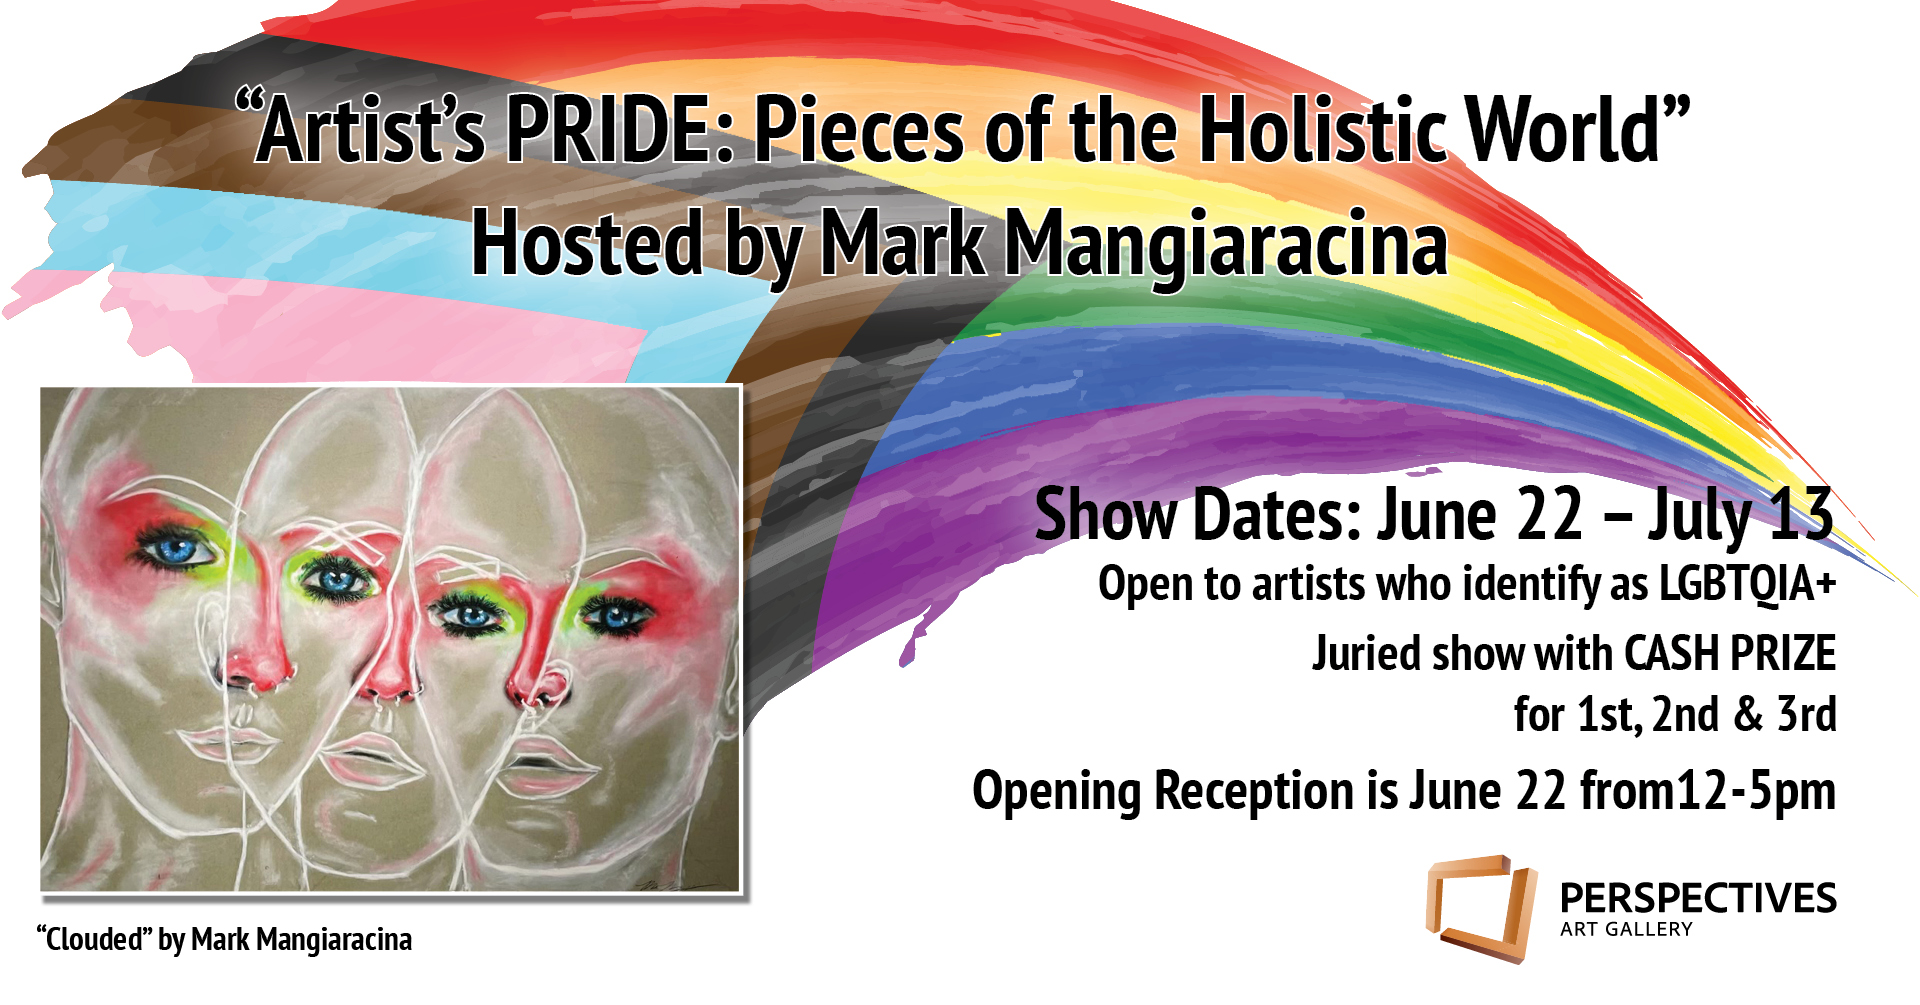 Artist’s PRIDE: Pieces of the Holistic World